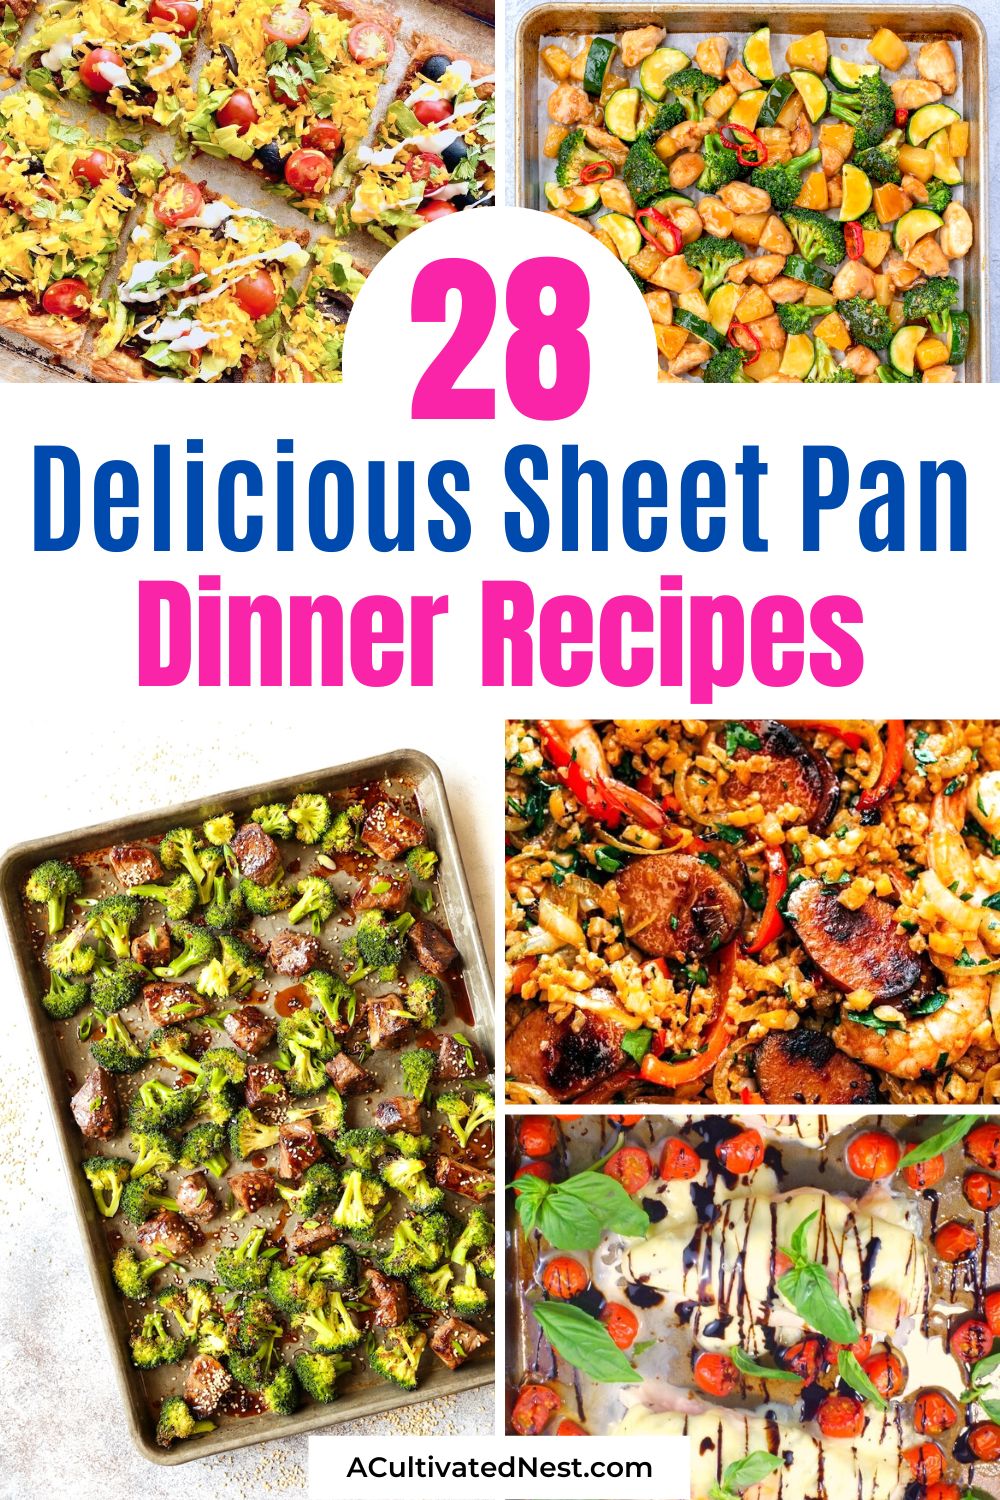 28 Delicious Sheet Pan Dinner Recipes- If you want something easy, delicious, and quick to prepare for dinner tonight, then you need to put together one of these delicious sheet pan dinner recipes! | easy dinner ideas, #sheetPanDinners #recipes #dinner #easyDinnerRecipes #ACultivatedNest